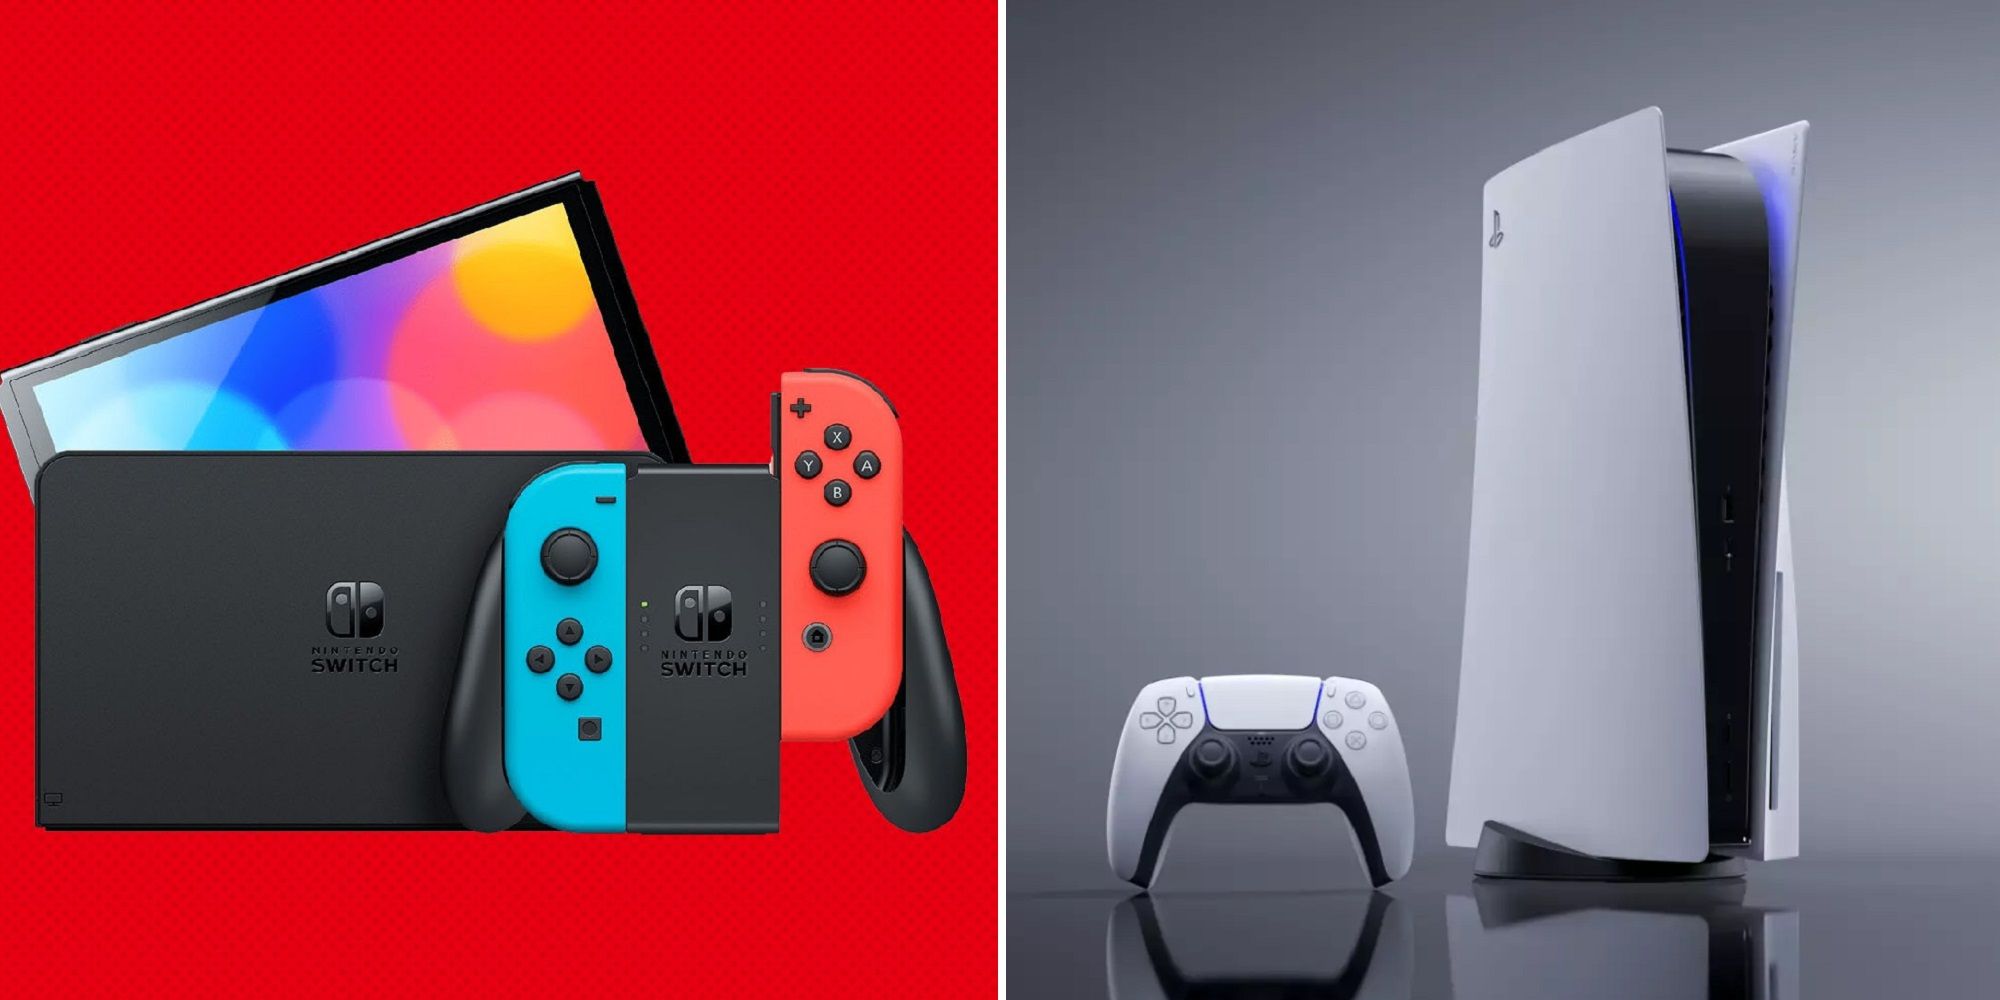 Nintendo Switch on track to become Nintendo's best selling home